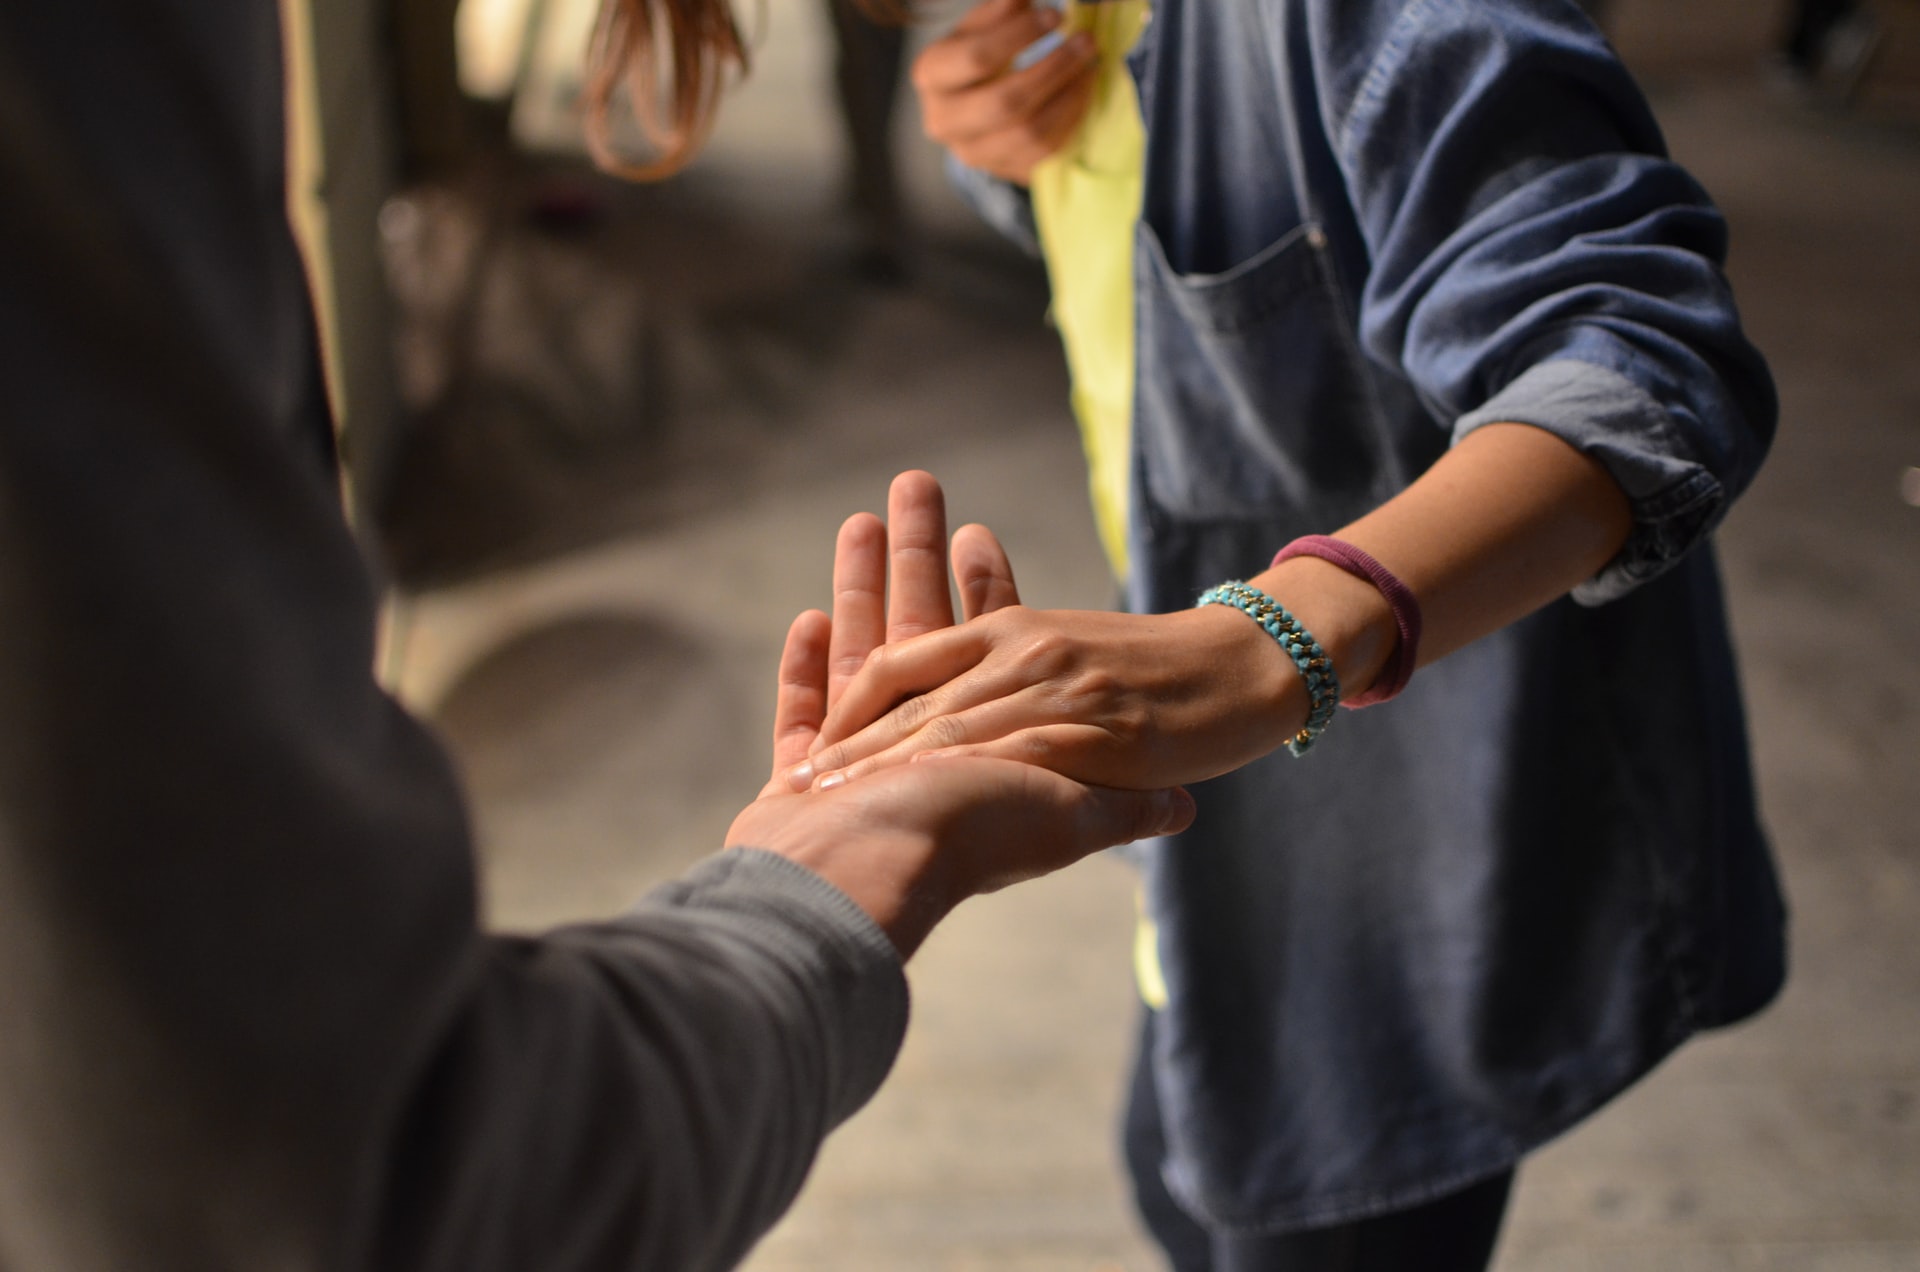 Close up on two people joining hands in fellowship.